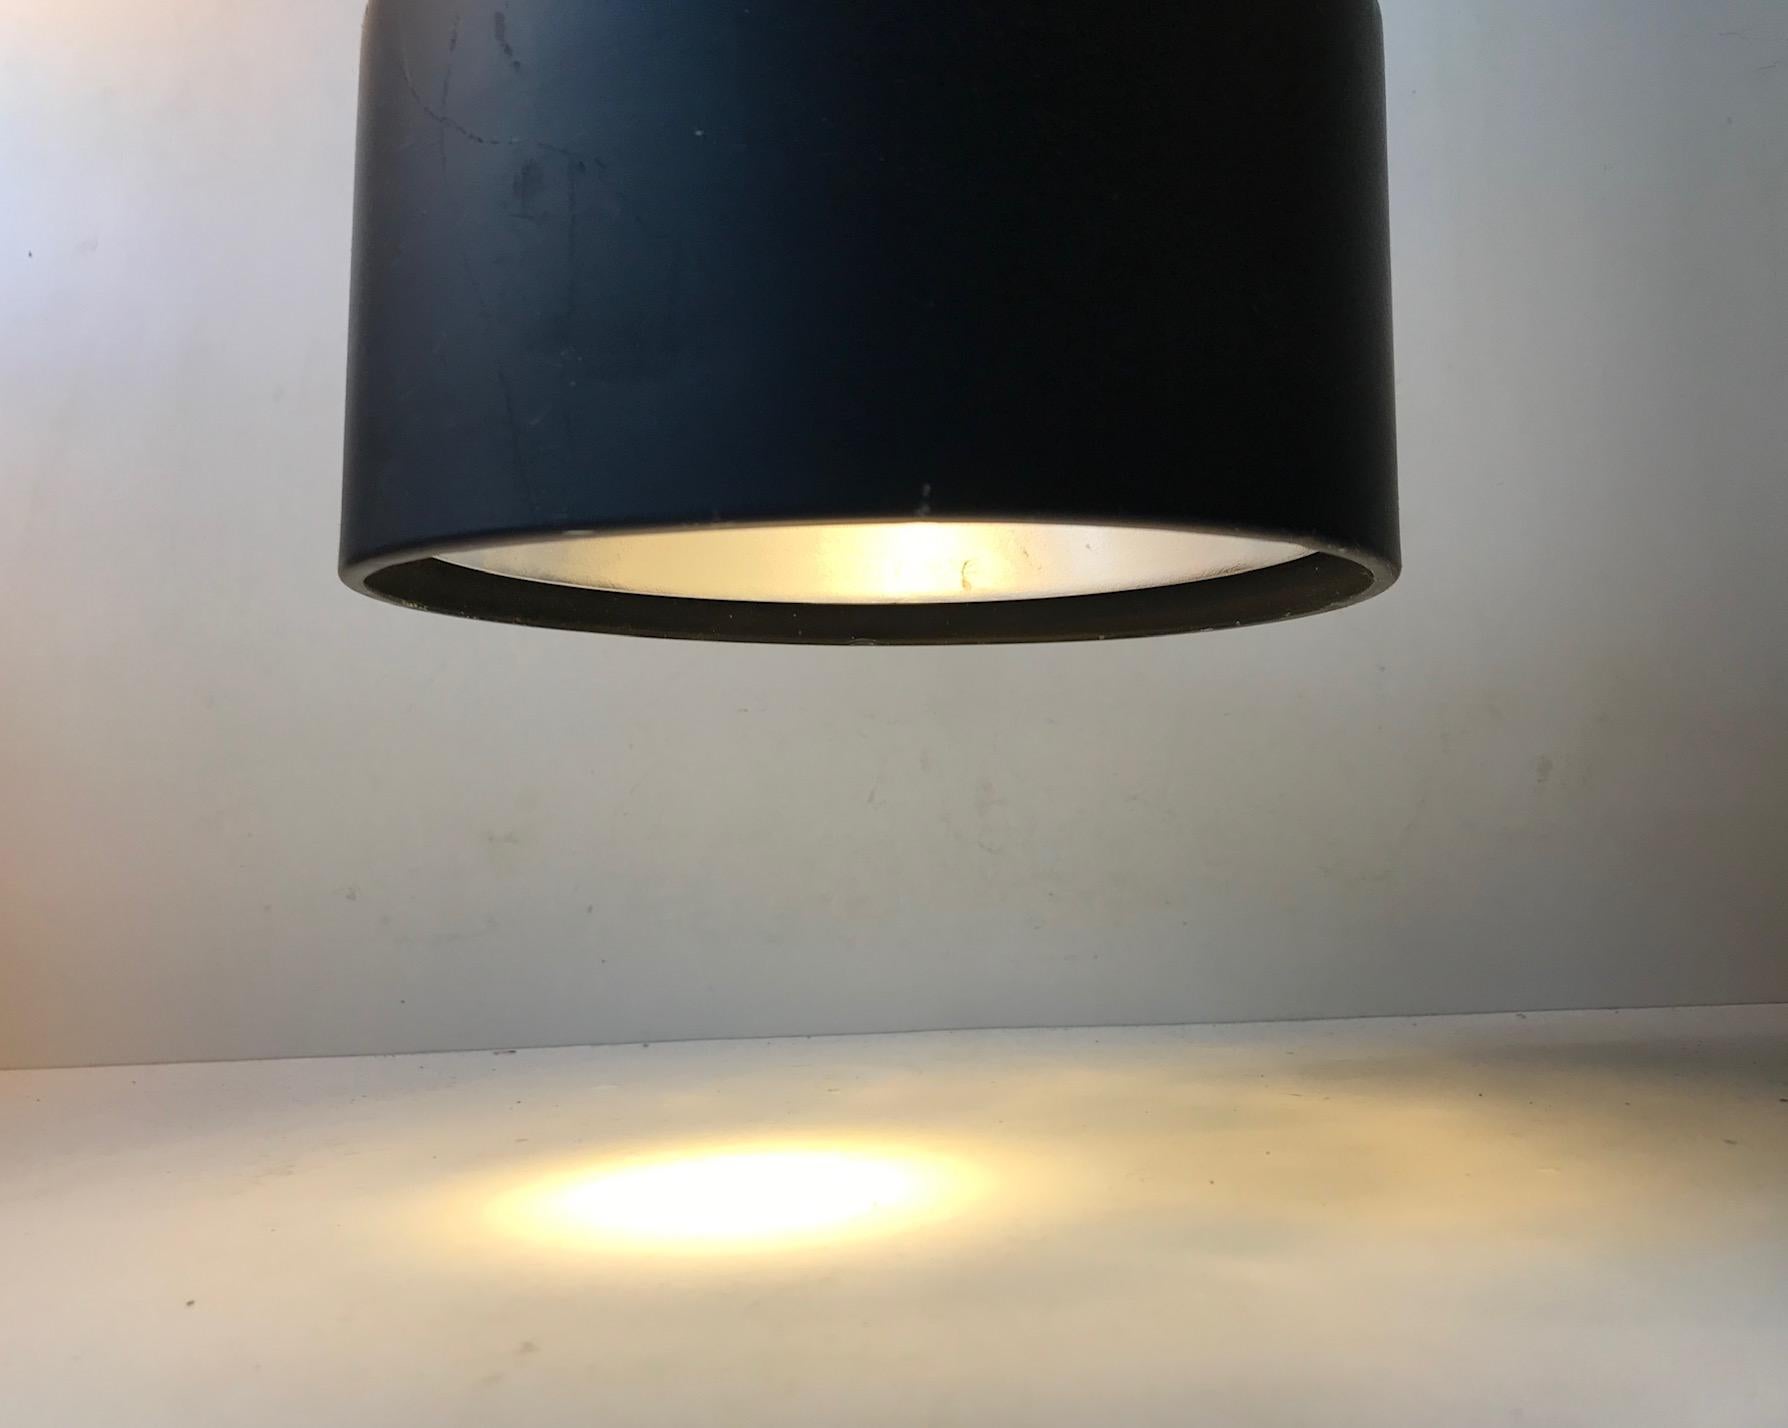 Adjustable wall lamp made from black powder-coated steel and aluminum. It features a porcelain socket and reflective inner shade. It was manufactured and designed in-house at Louis Poulsen in Denmark during the 1970s.